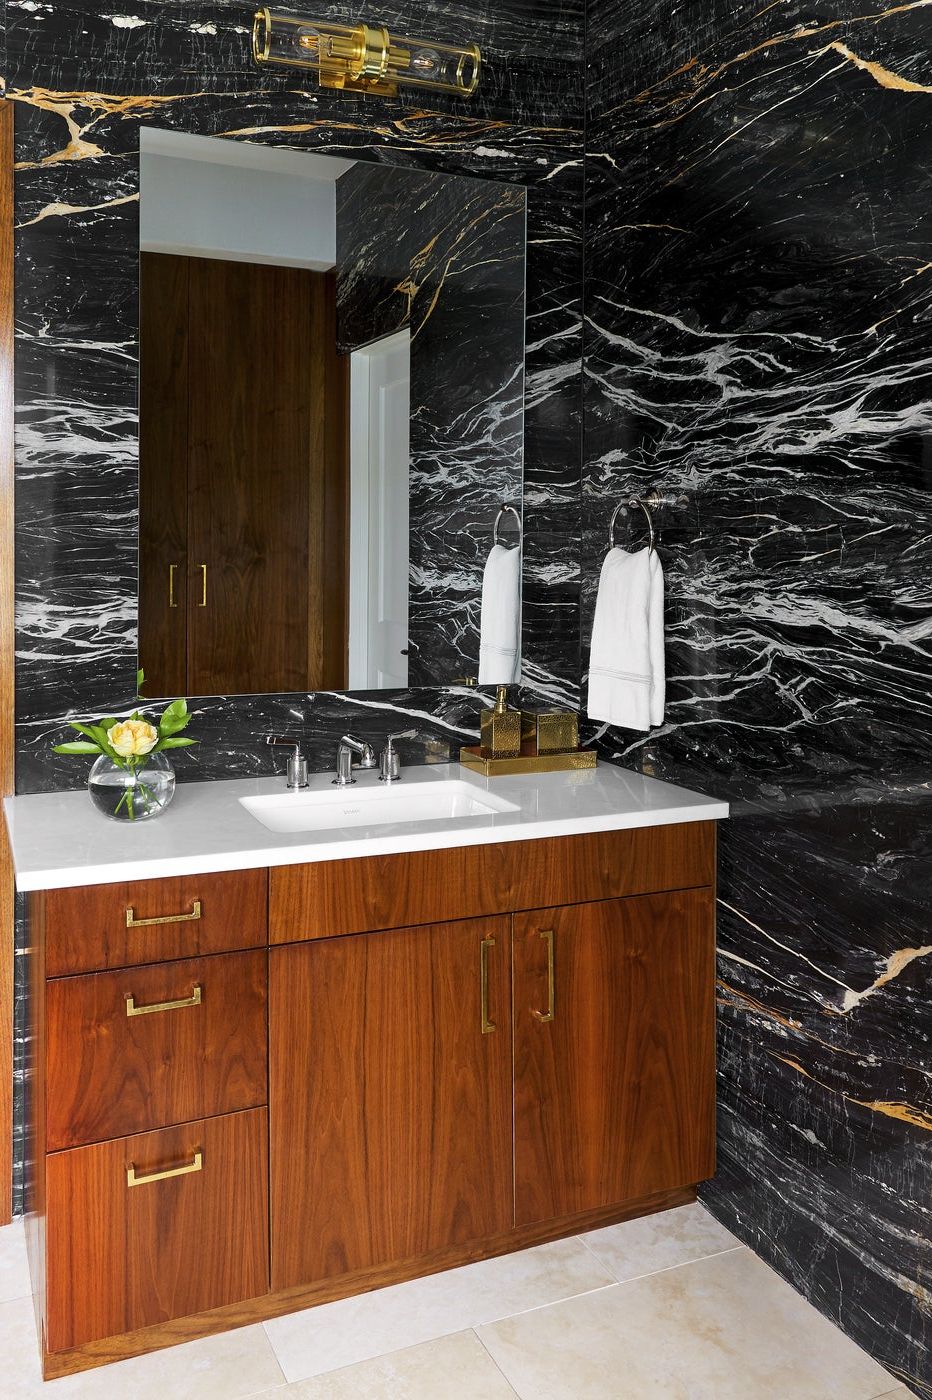 https://hips.hearstapps.com/hmg-prod/images/black-and-white-bathrooms-j-fisher-interiors-1637343796.jpeg?crop=0.9333333333333333xw:1xh;center,top&resize=980:*